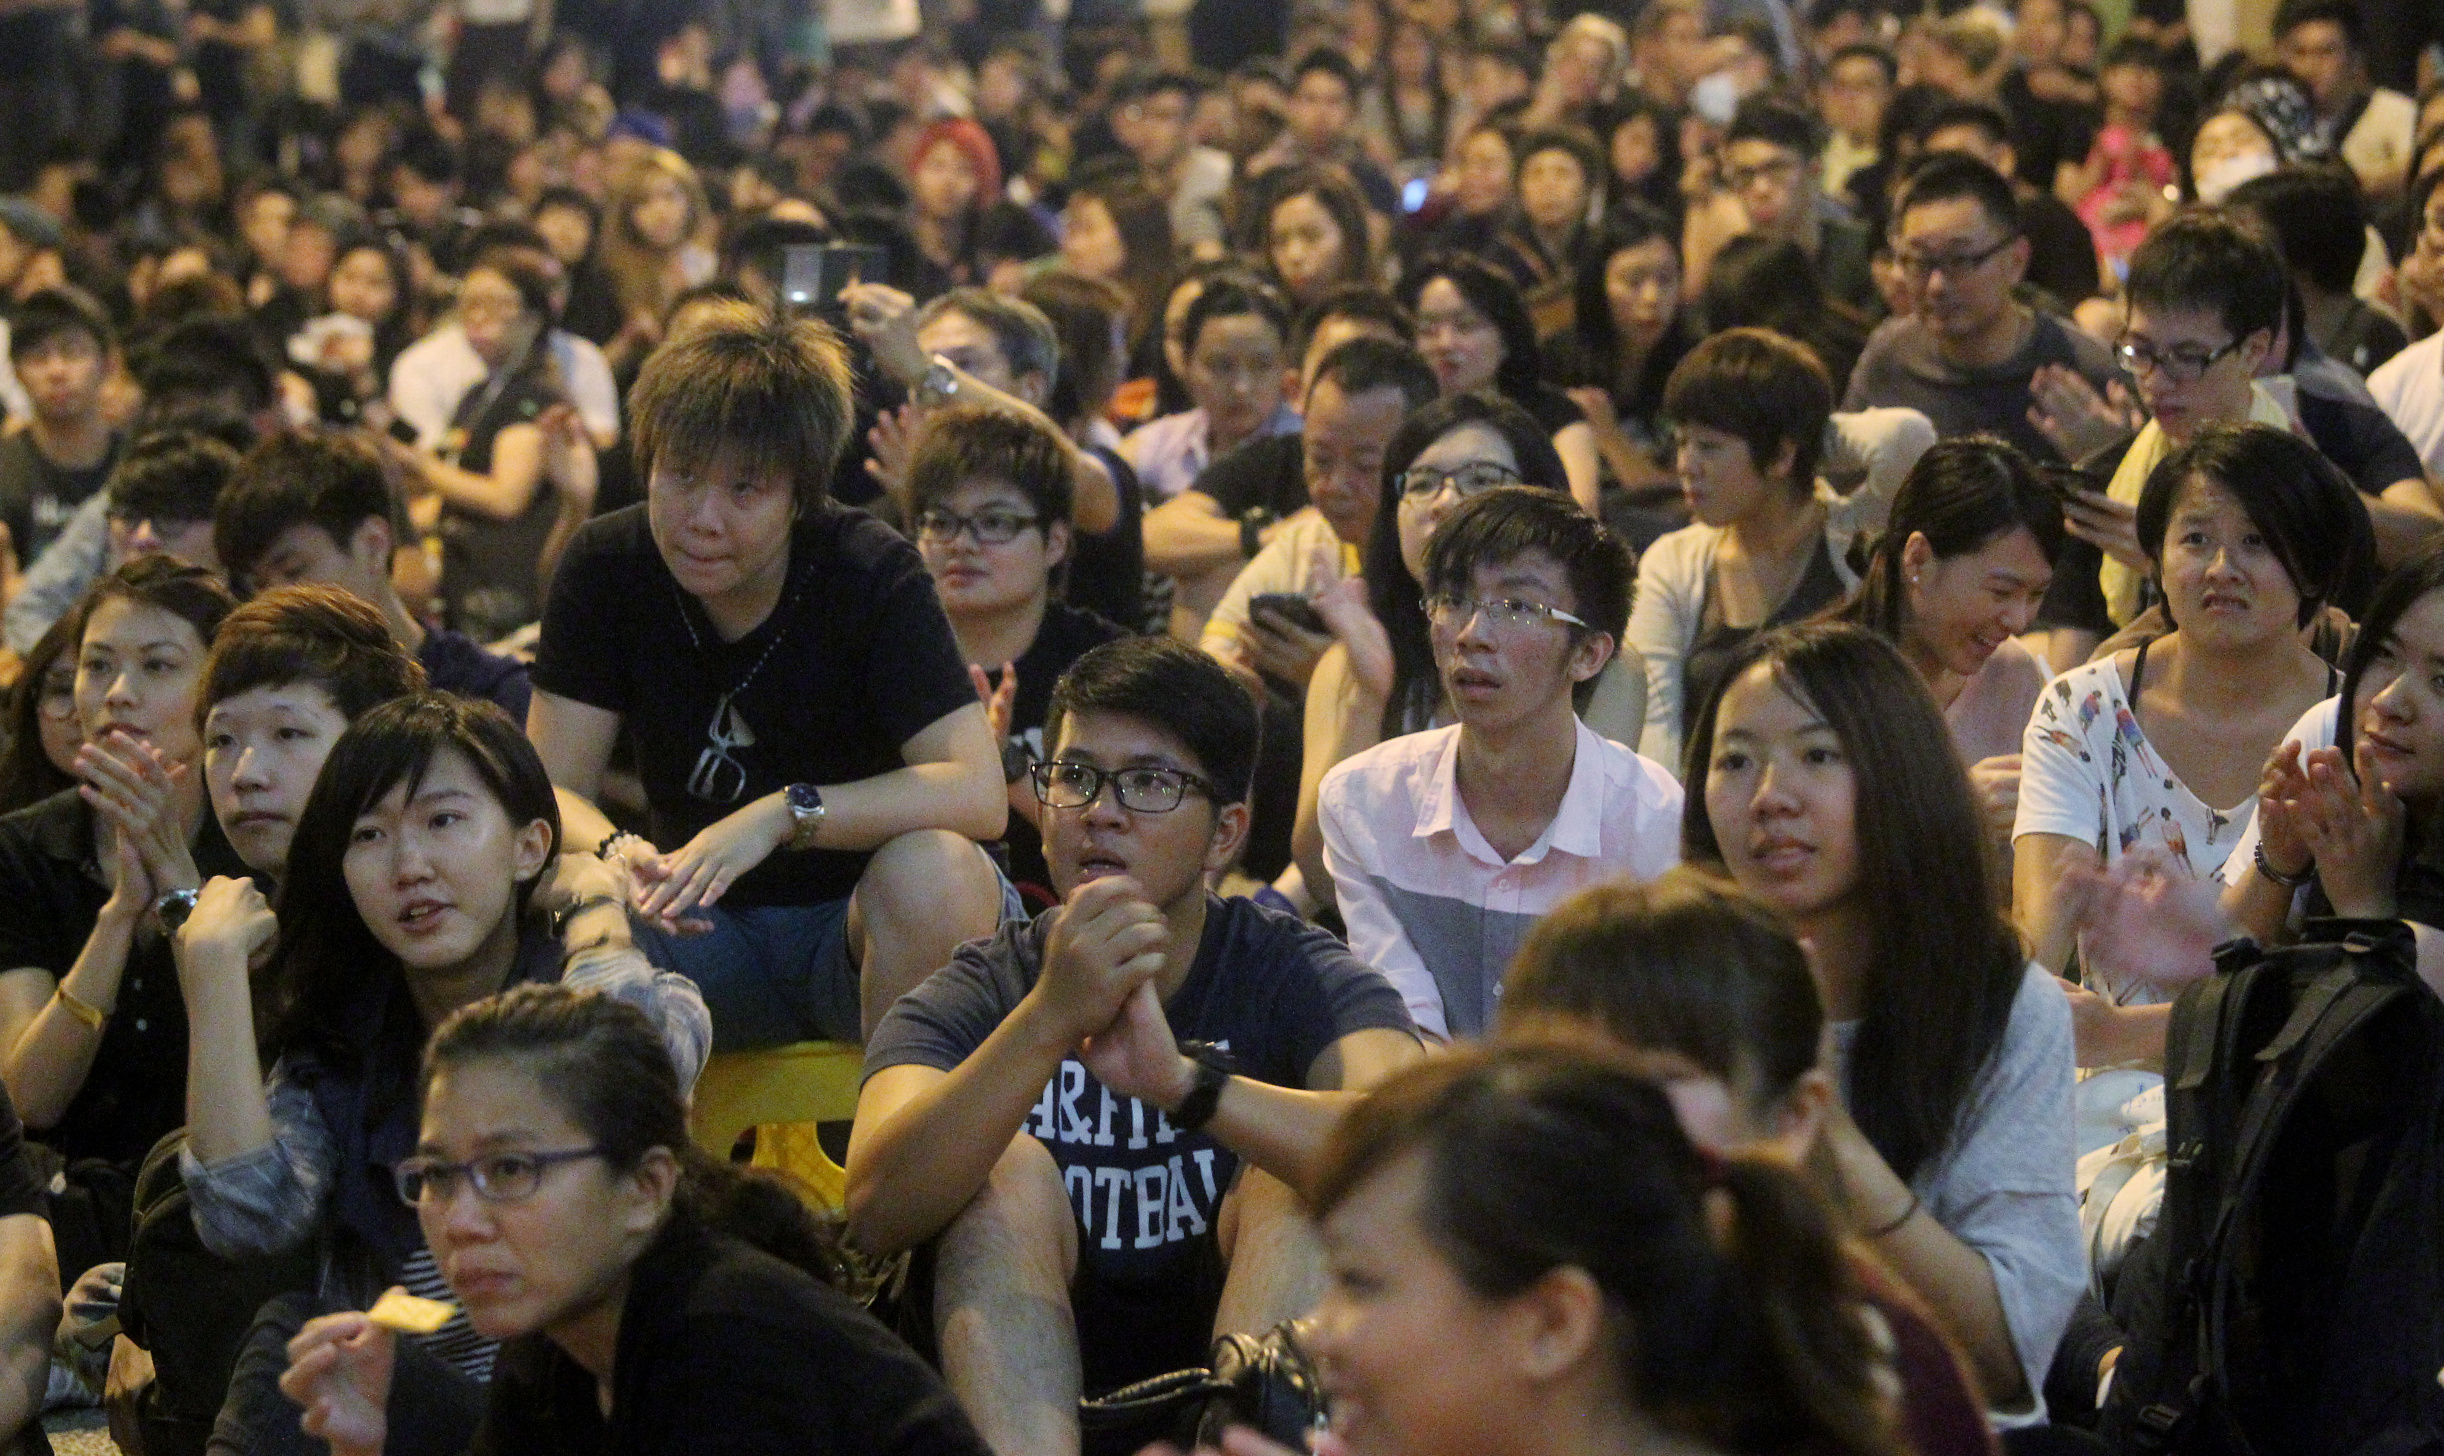 The youth-led Occupy protests have resulted in significant emotional distress among young people. Photo: May Tse